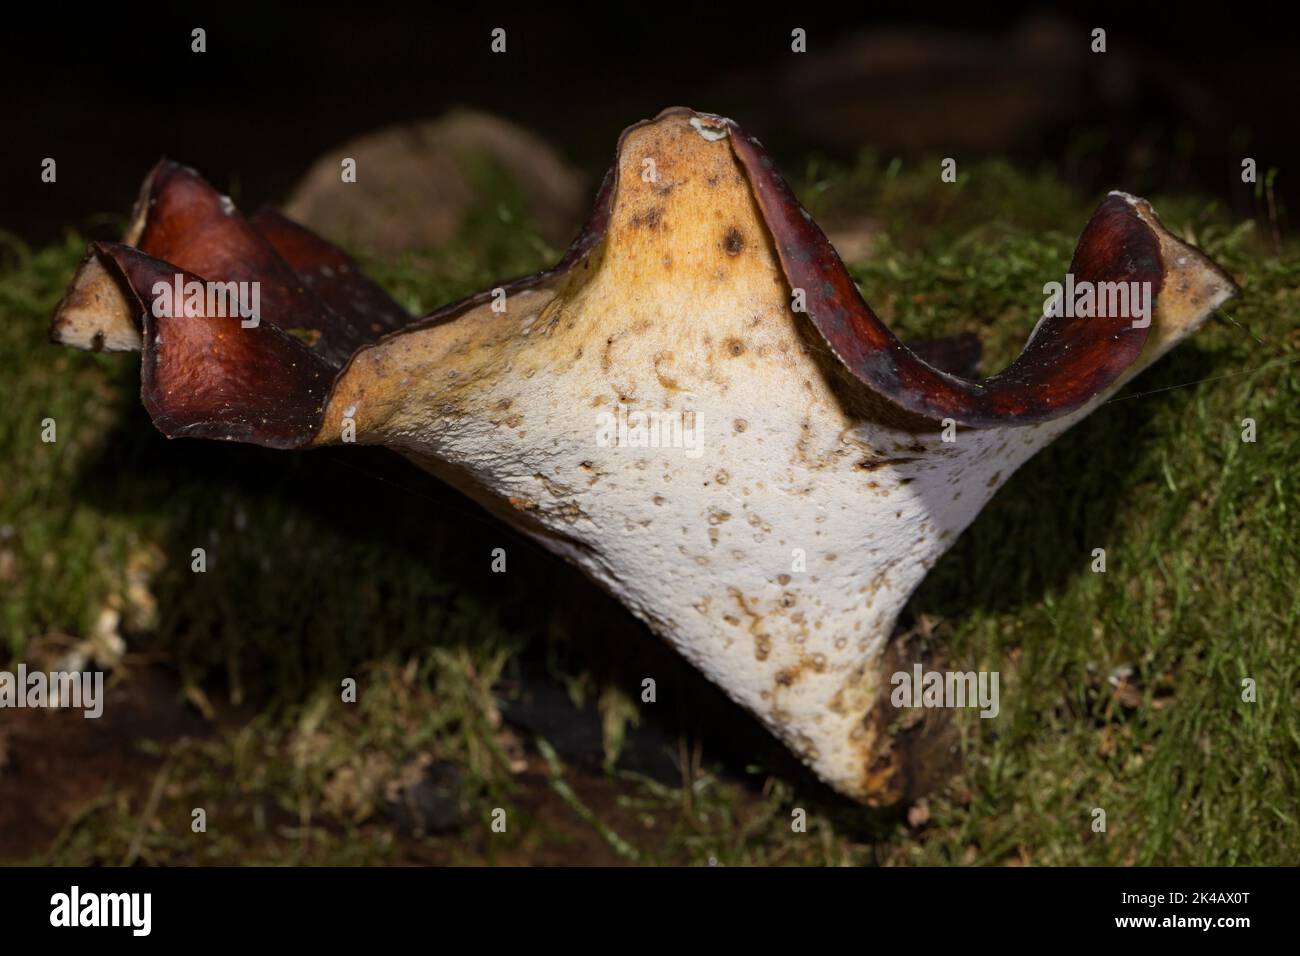 Chestnut-brown stem porling Fruiting body with whitish stem and funnel-shaped chestnut-brown cap on tree trunk with green moss Stock Photo